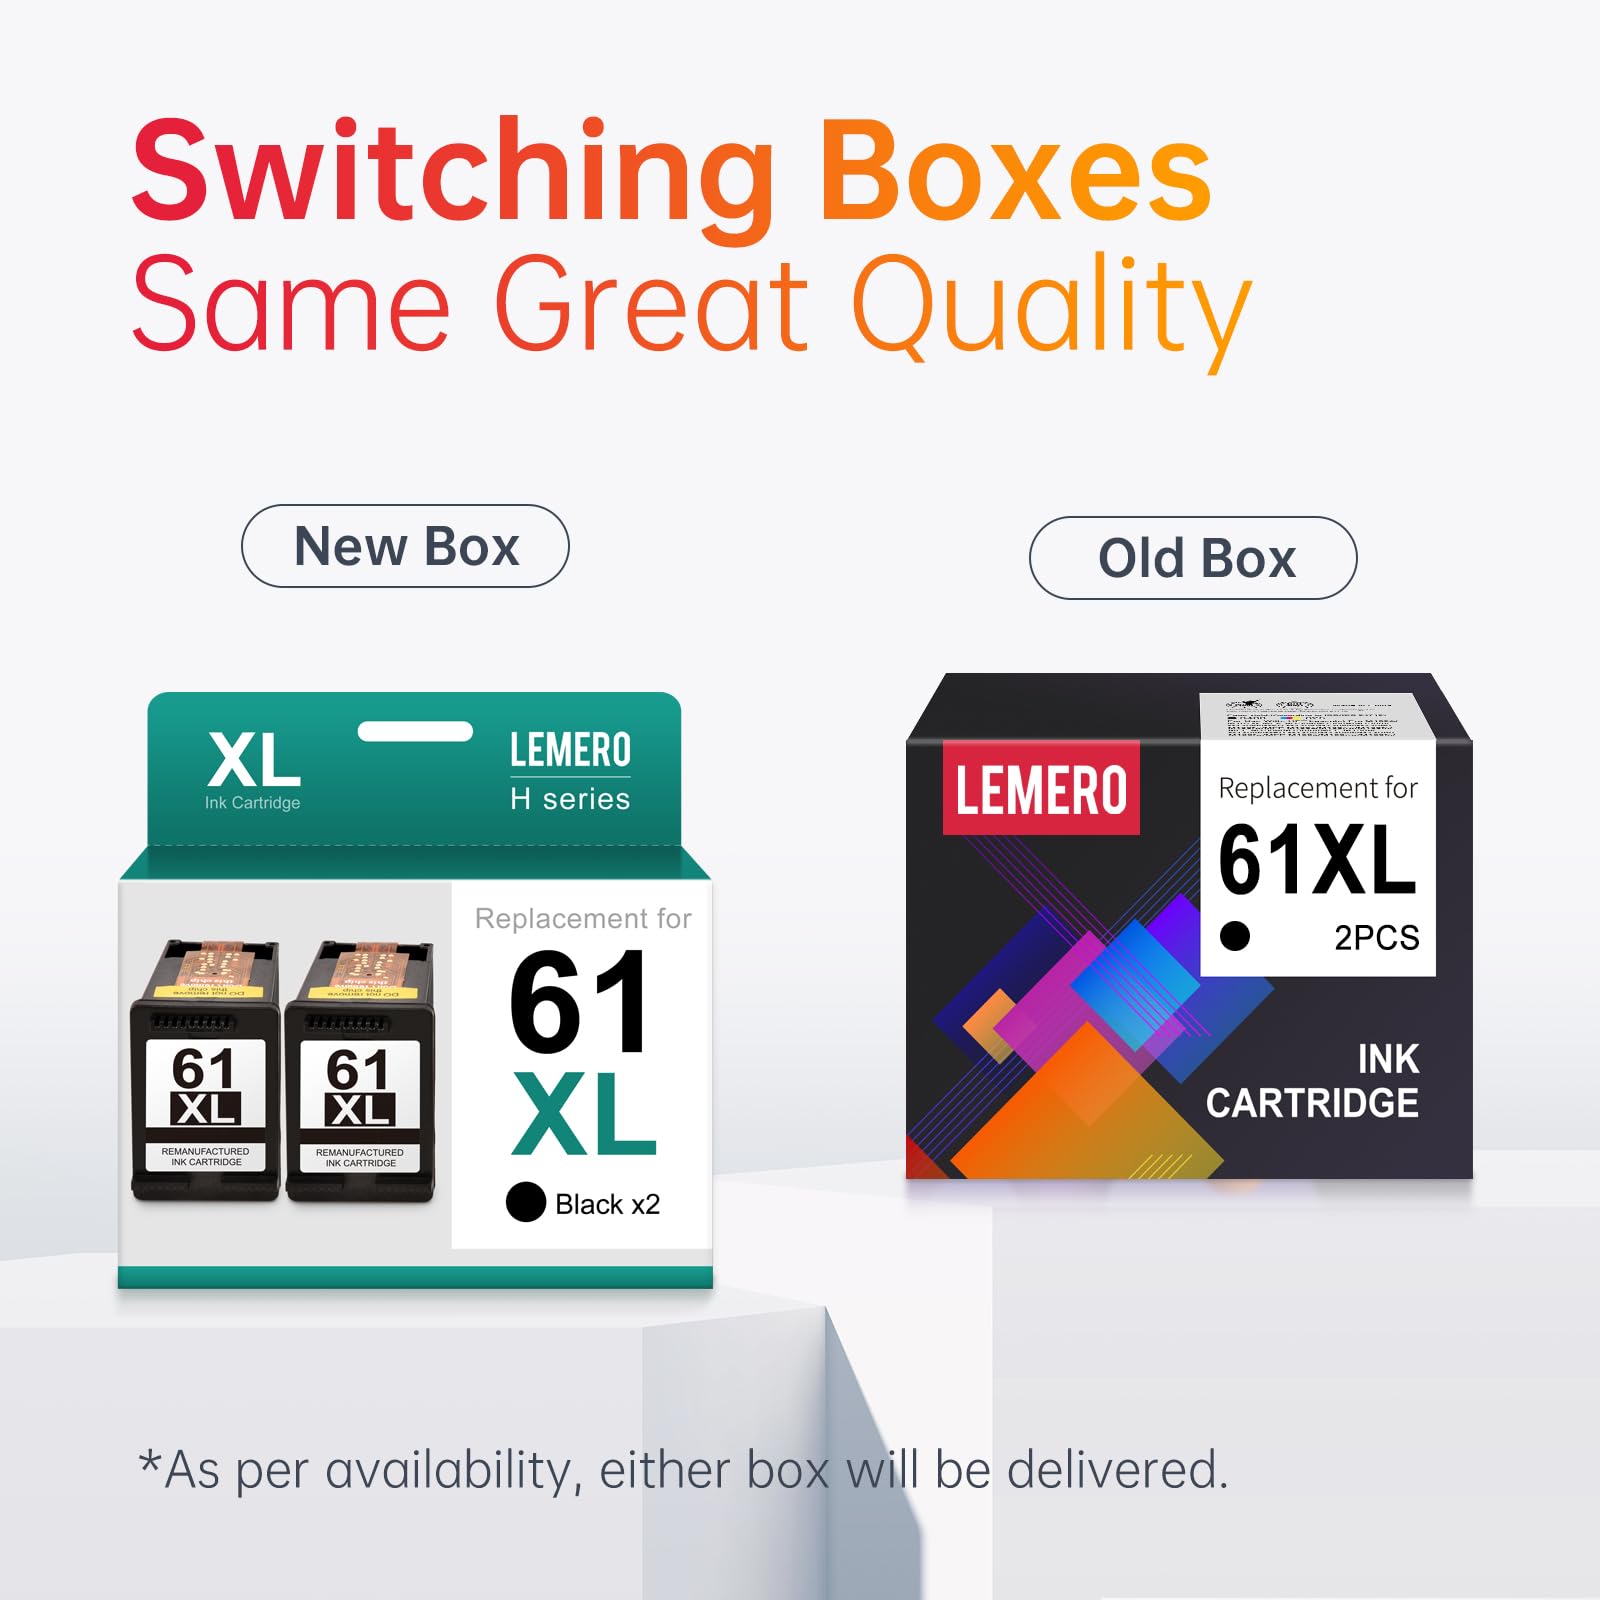 LEMERO HP 61XL black ink cartridges, comparing the new and old box designs to emphasize unchanged high quality.